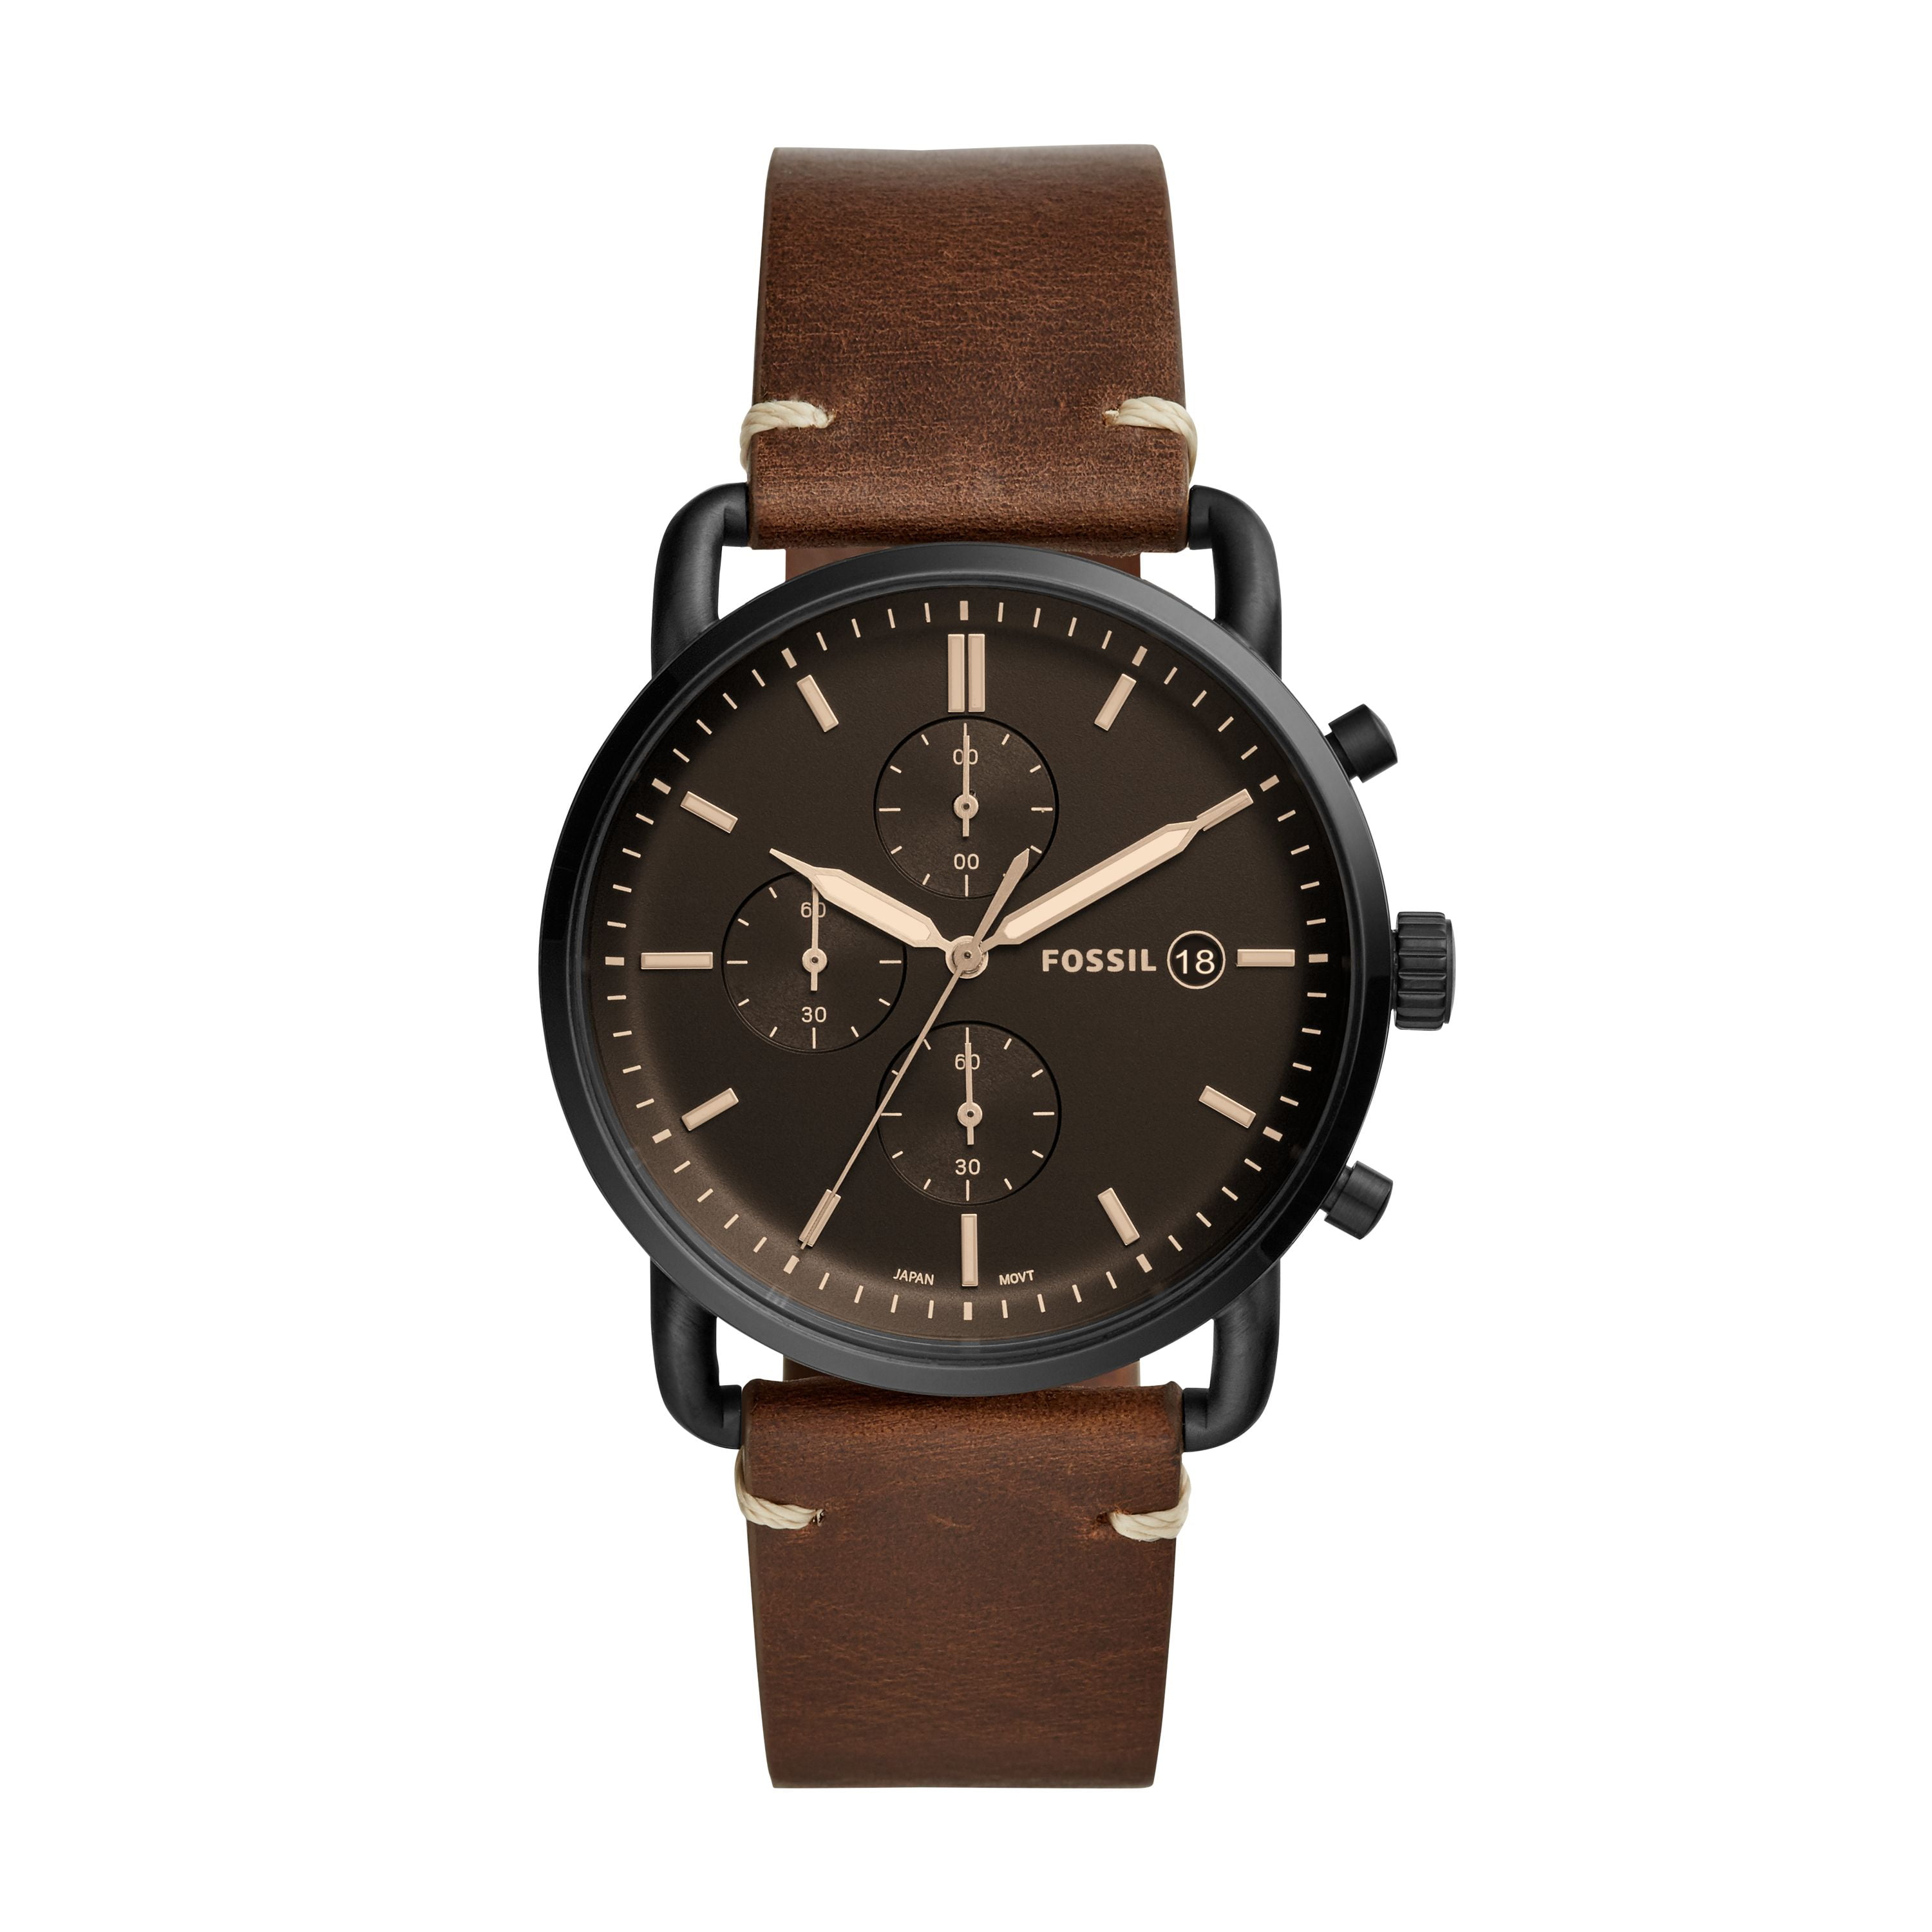 Fossil Men's Commuter Chronograph Brown Leather Watch (Style: FS5403 ...